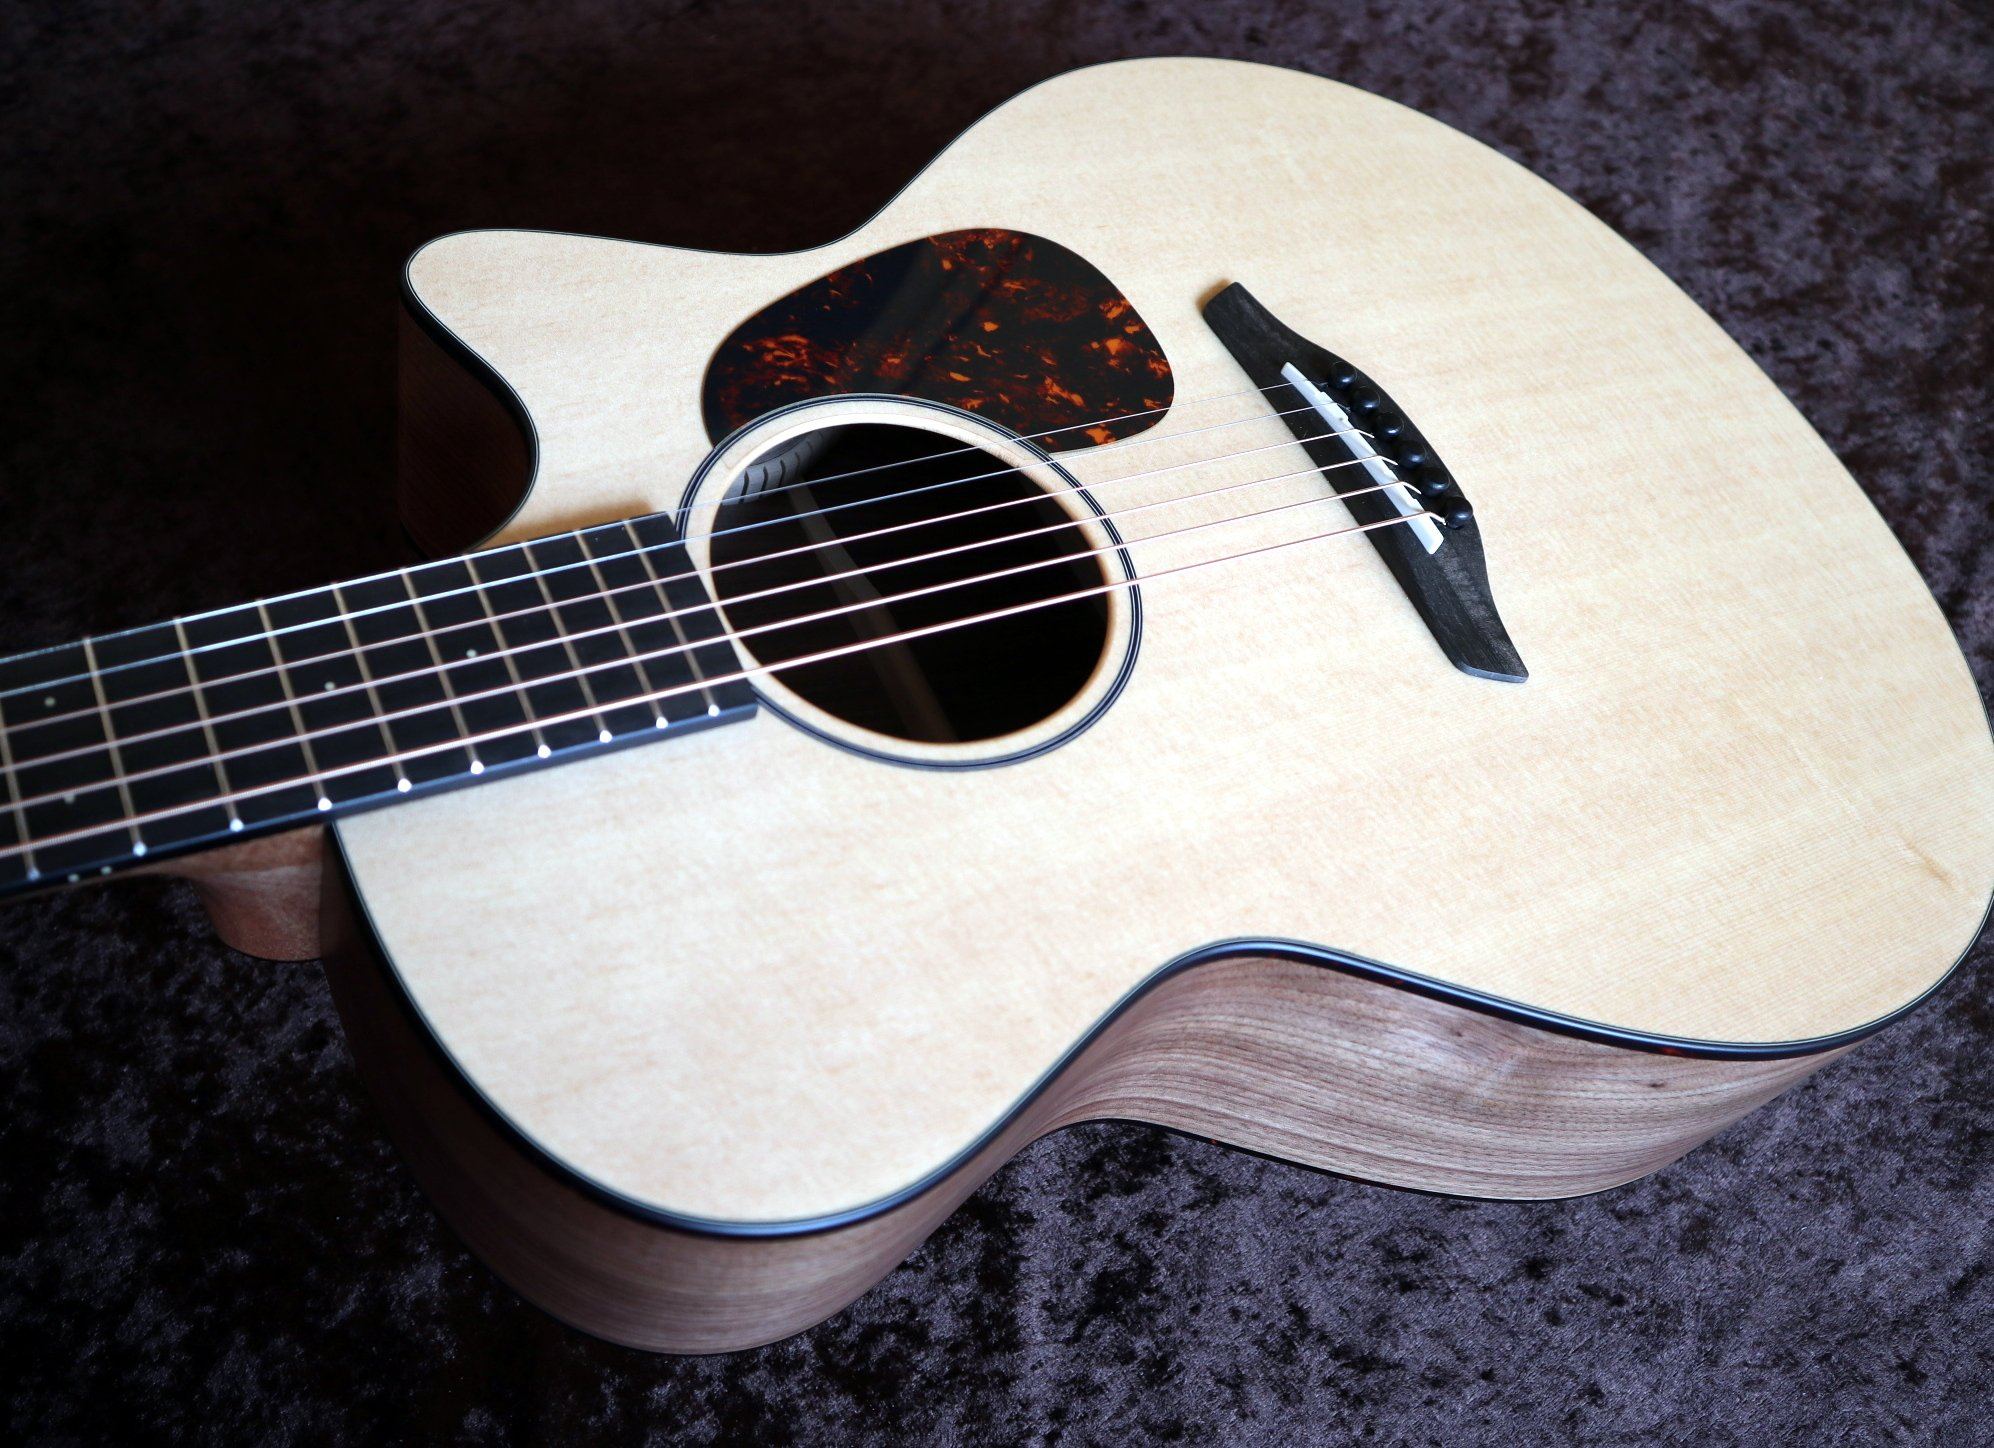 Furch Blue GC SW (Spruce / Walnut / Cutaway) Acoustic Guitar, Acoustic Guitar for sale at Richards Guitars.